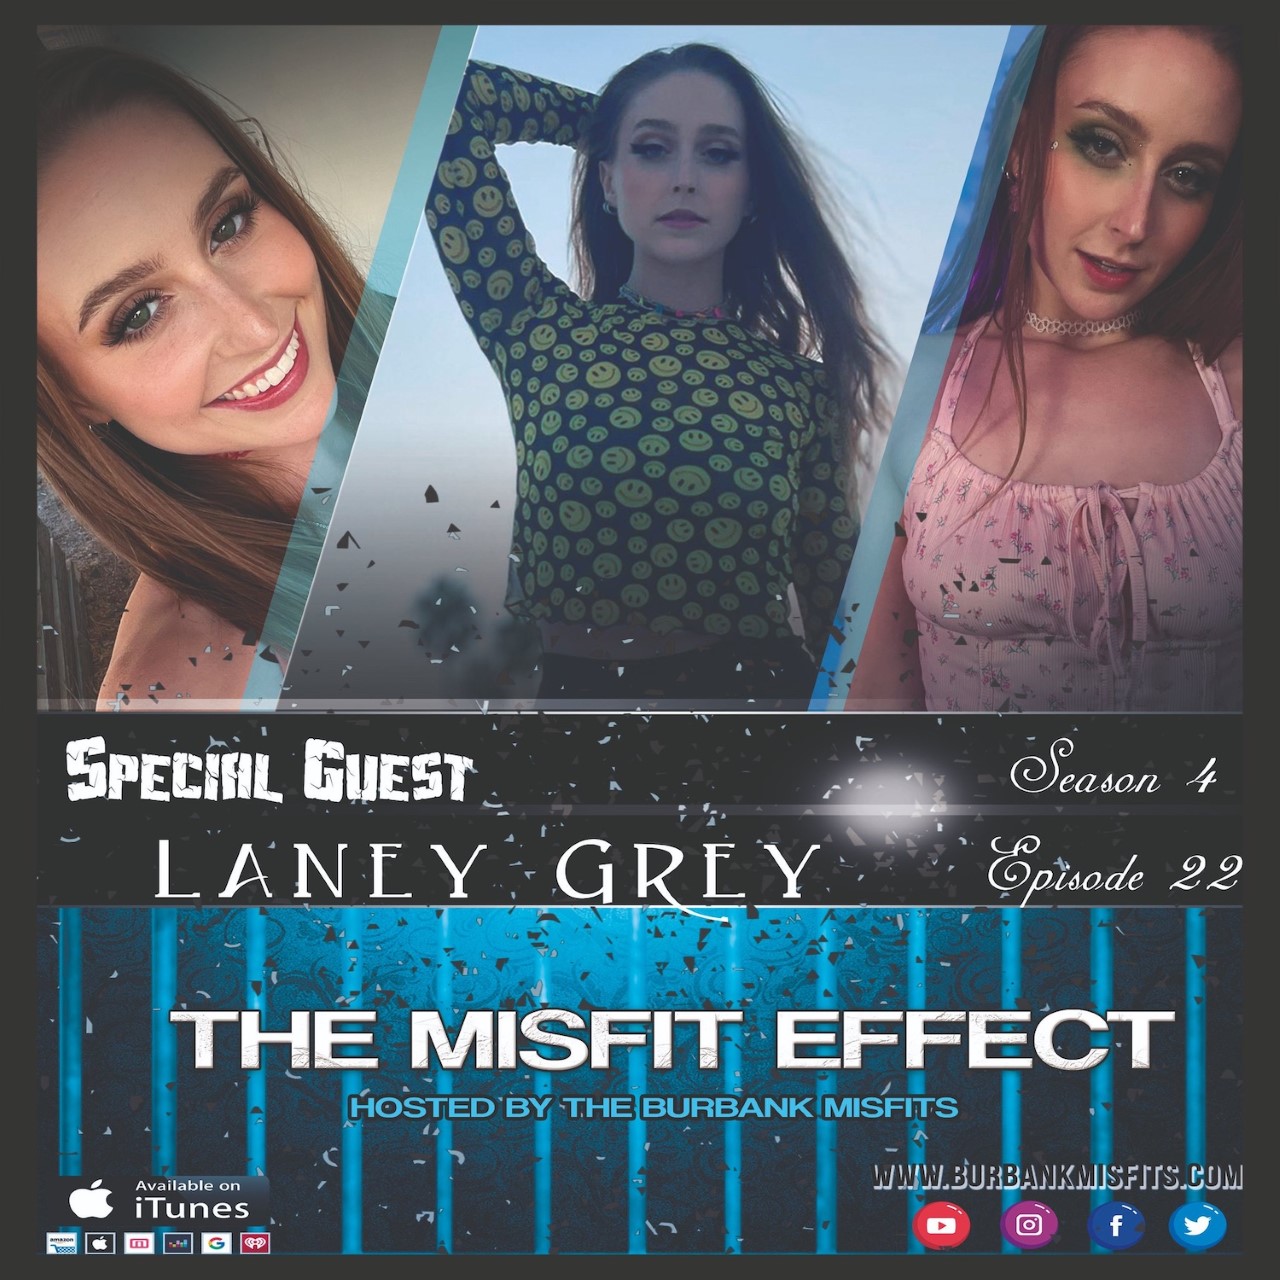 Laney Grey Guests on the Burbank Misfits Podcast in Must-Hear Ep